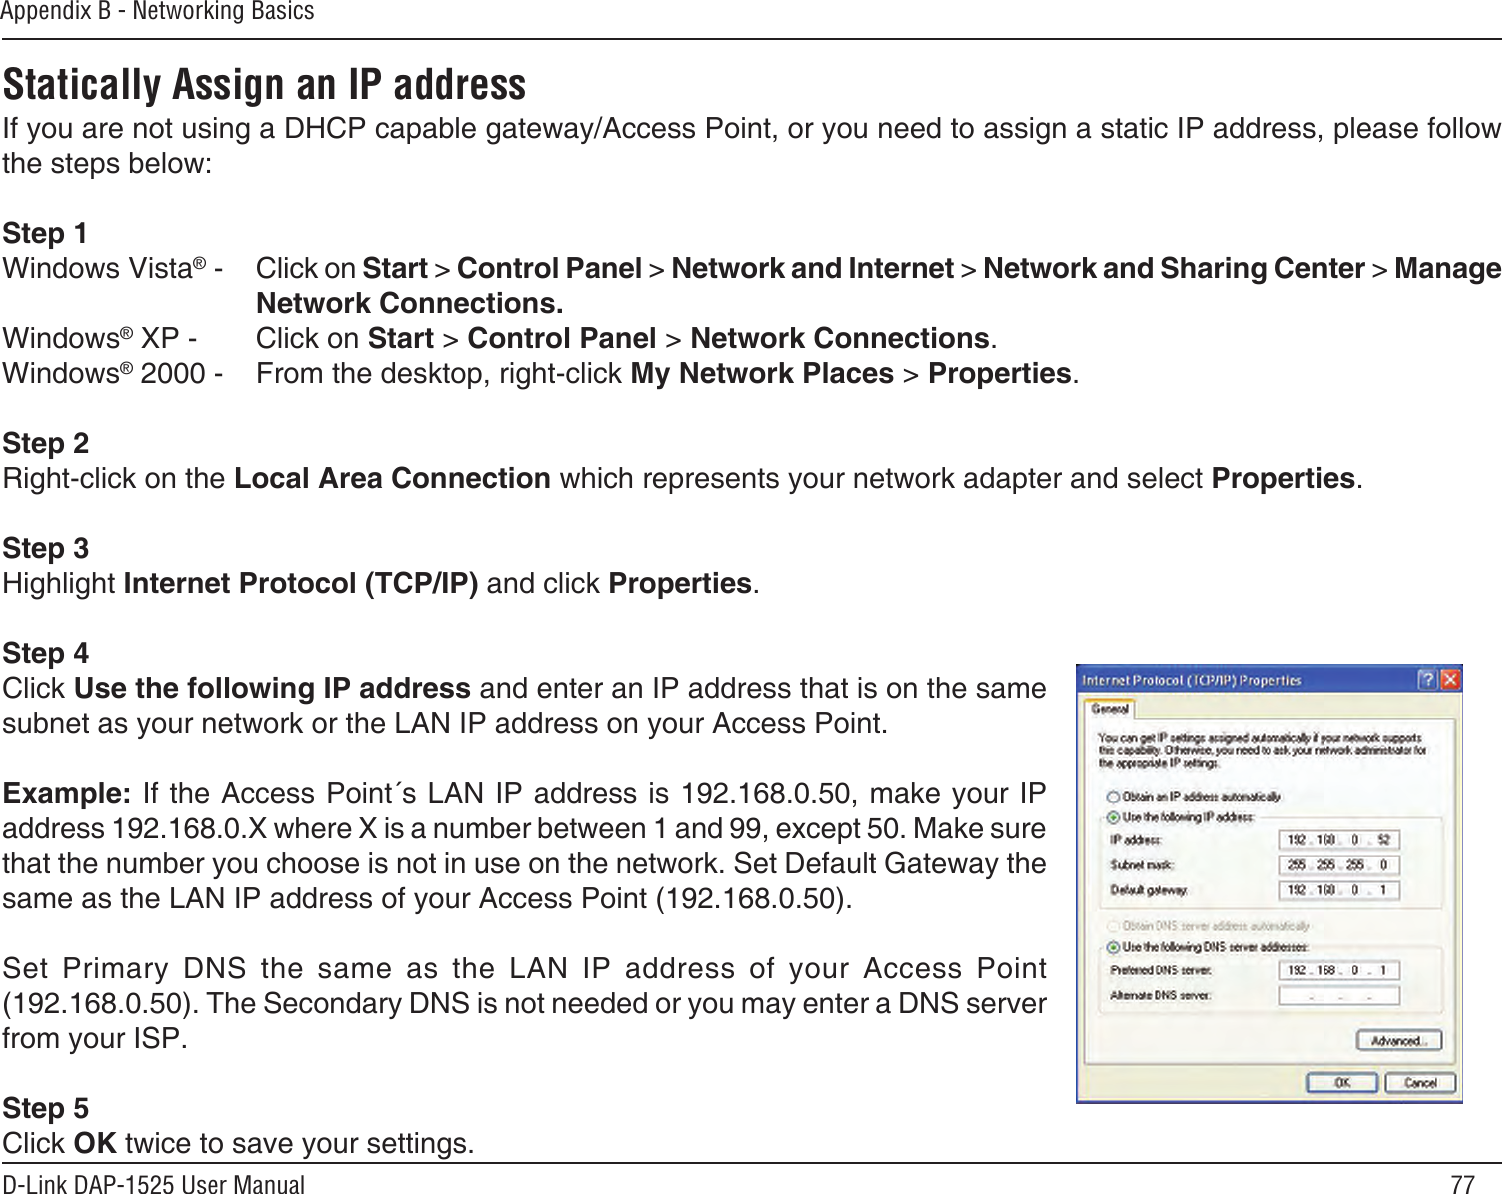 77D-Link DAP-1525 User ManualAppendix B - Networking BasicsStatically Assign an IP addressIf you are not using a DHCP capable gateway/Access Point, or you need to assign a static IP address, please follow the steps below:Step 1Windows Vista® -  Click on Start &gt; Control Panel &gt; Network and Internet &gt; Network and Sharing Center &gt; Manage Network Connections.Windows® XP -  Click on Start &gt; Control Panel &gt; Network Connections.Windows® 2000 -  From the desktop, right-click My Network Places &gt; Properties.Step 2Right-click on the Local Area Connection which represents your network adapter and select Properties.Step 3Highlight Internet Protocol (TCP/IP) and click Properties.Step 4Click Use the following IP address and enter an IP address that is on the same subnet as your network or the LAN IP address on your Access Point. Example: If the Access Point´s LAN IP address is 192.168.0.50, make your IP address 192.168.0.X where X is a number between 1 and 99, except 50. Make sure that the number you choose is not in use on the network. Set Default Gateway the same as the LAN IP address of your Access Point (192.168.0.50). Set  Primary  DNS  the  same  as  the  LAN  IP  address  of  your  Access  Point (192.168.0.50). The Secondary DNS is not needed or you may enter a DNS server from your ISP.Step 5Click OK twice to save your settings.